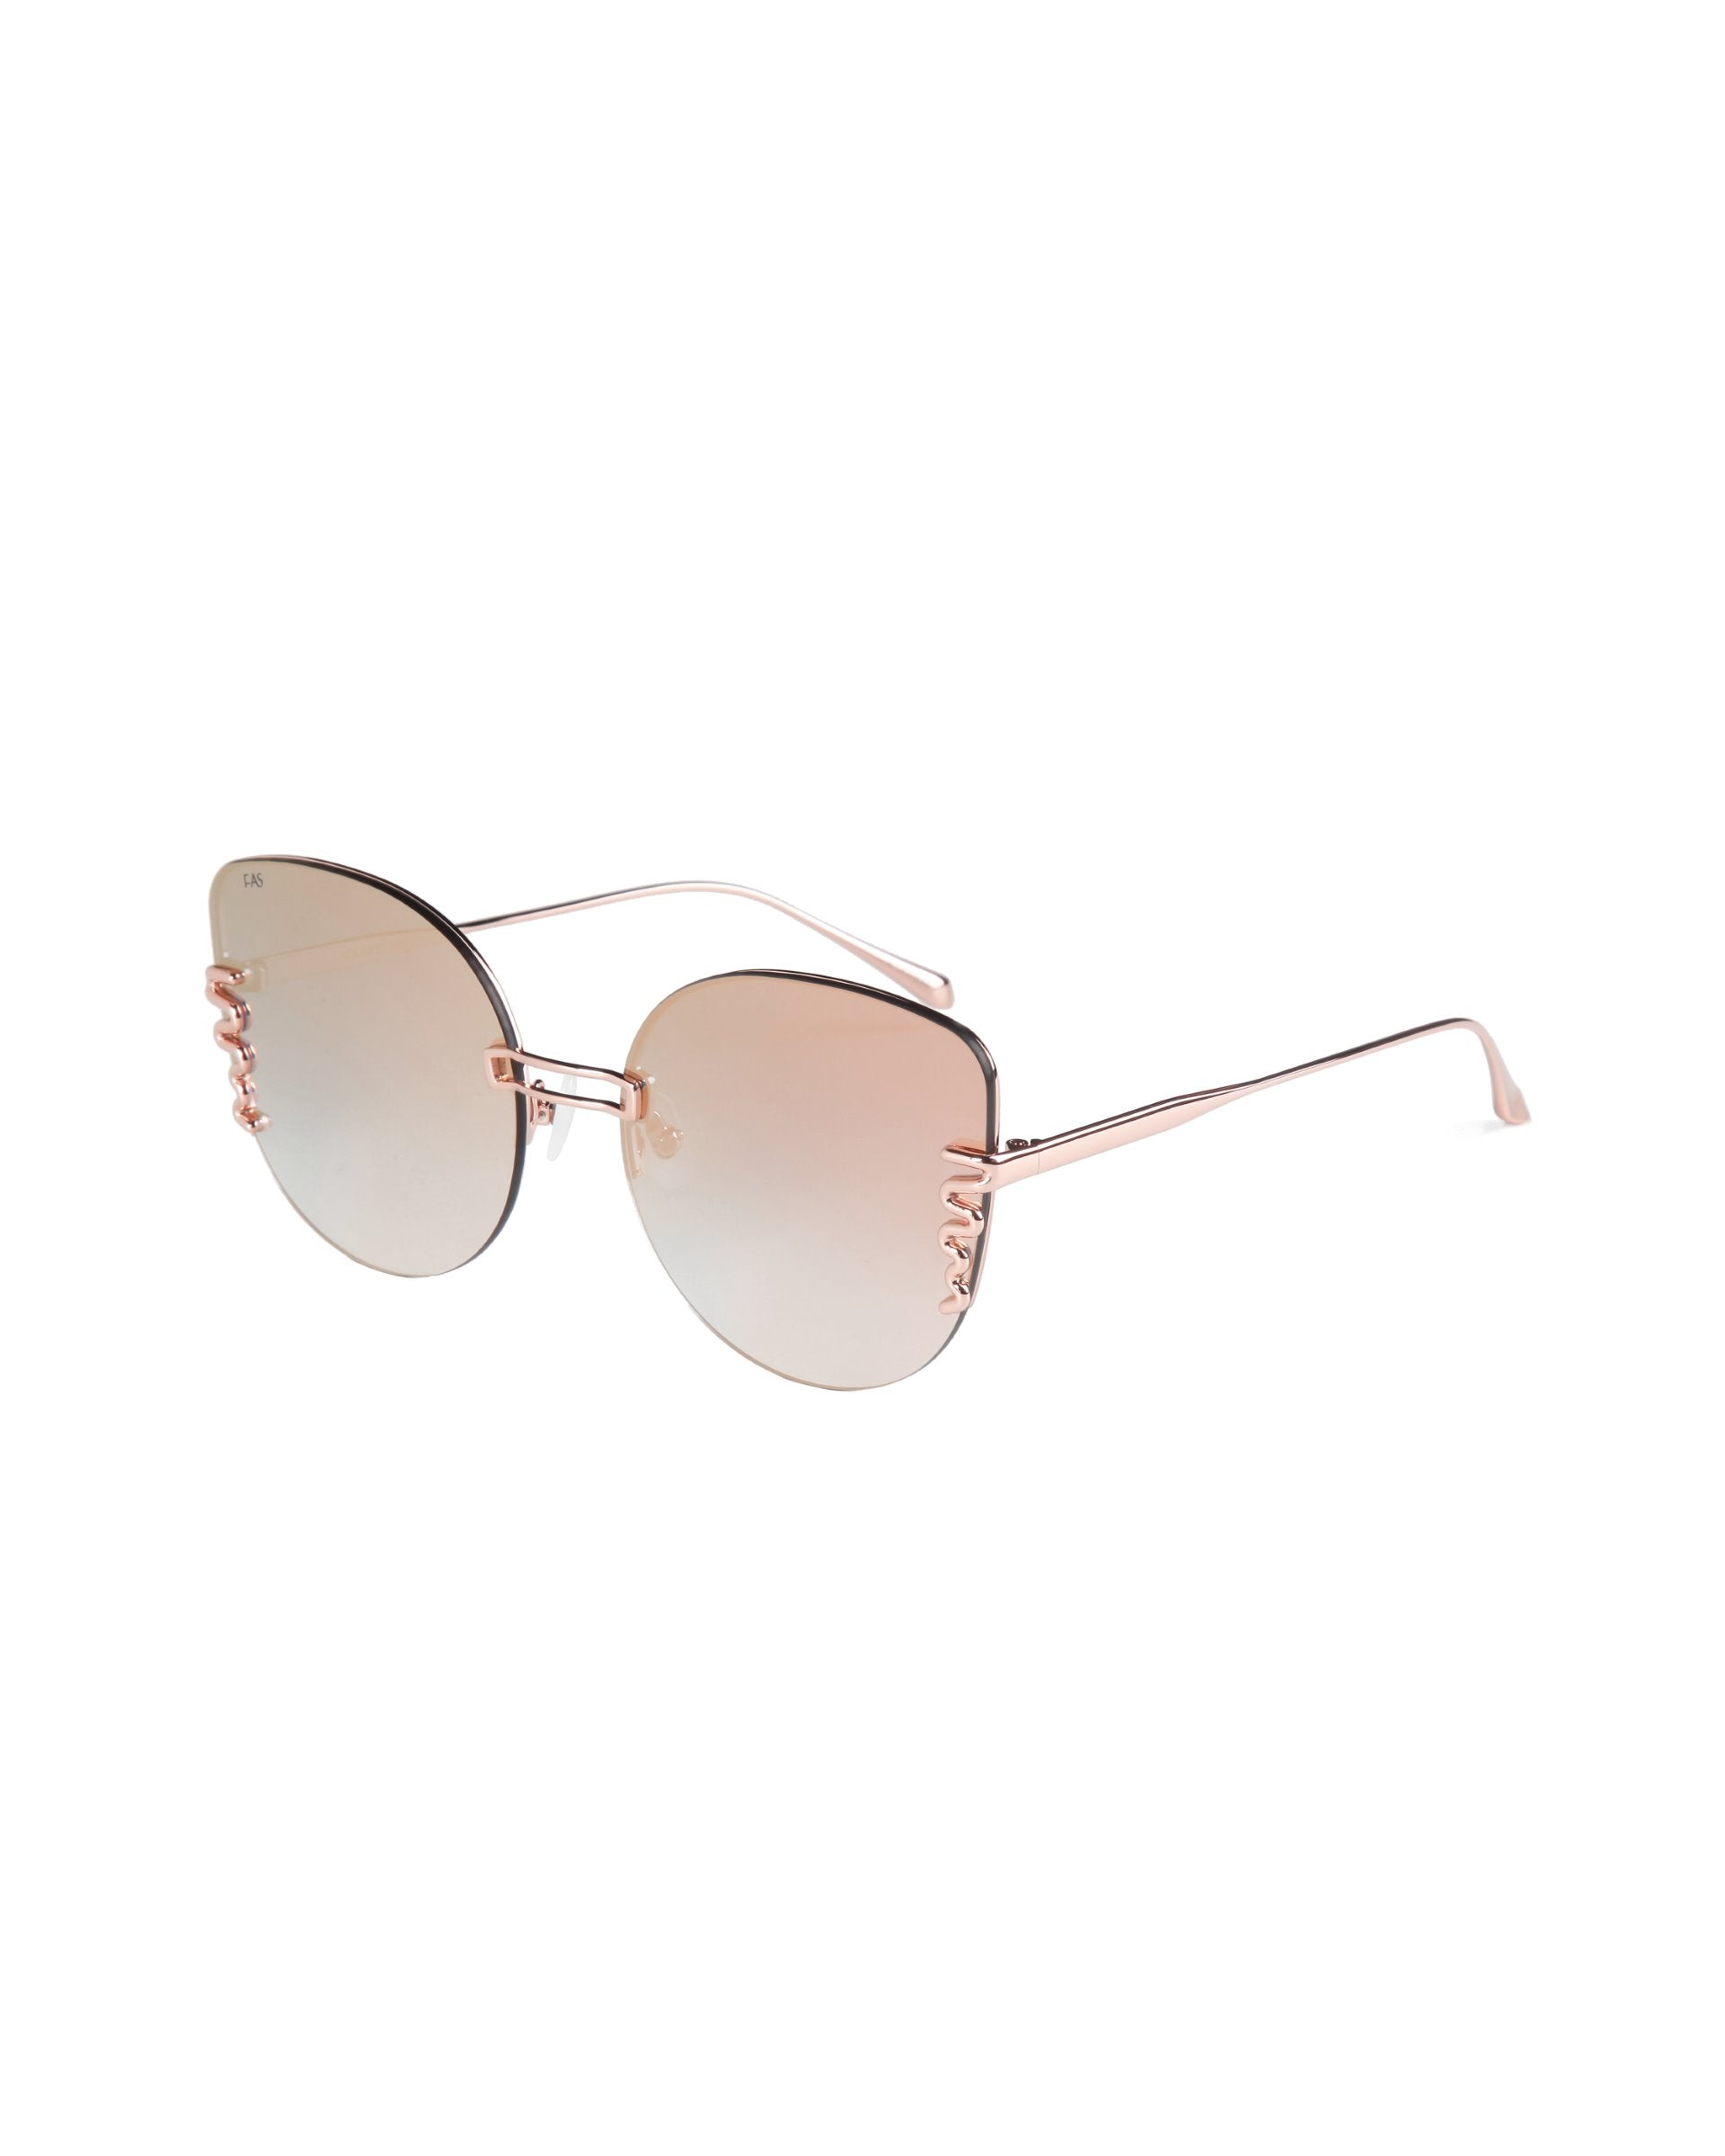 A pair of stylish, oversized cat-eye sunglasses with round, gradient lenses transitioning from light pink to gray. They feature thin, rose gold frames and a unique design on the hinges. The temples are slender with a delicate and modern look. These are the Girlboss by For Art&#39;s Sake®.